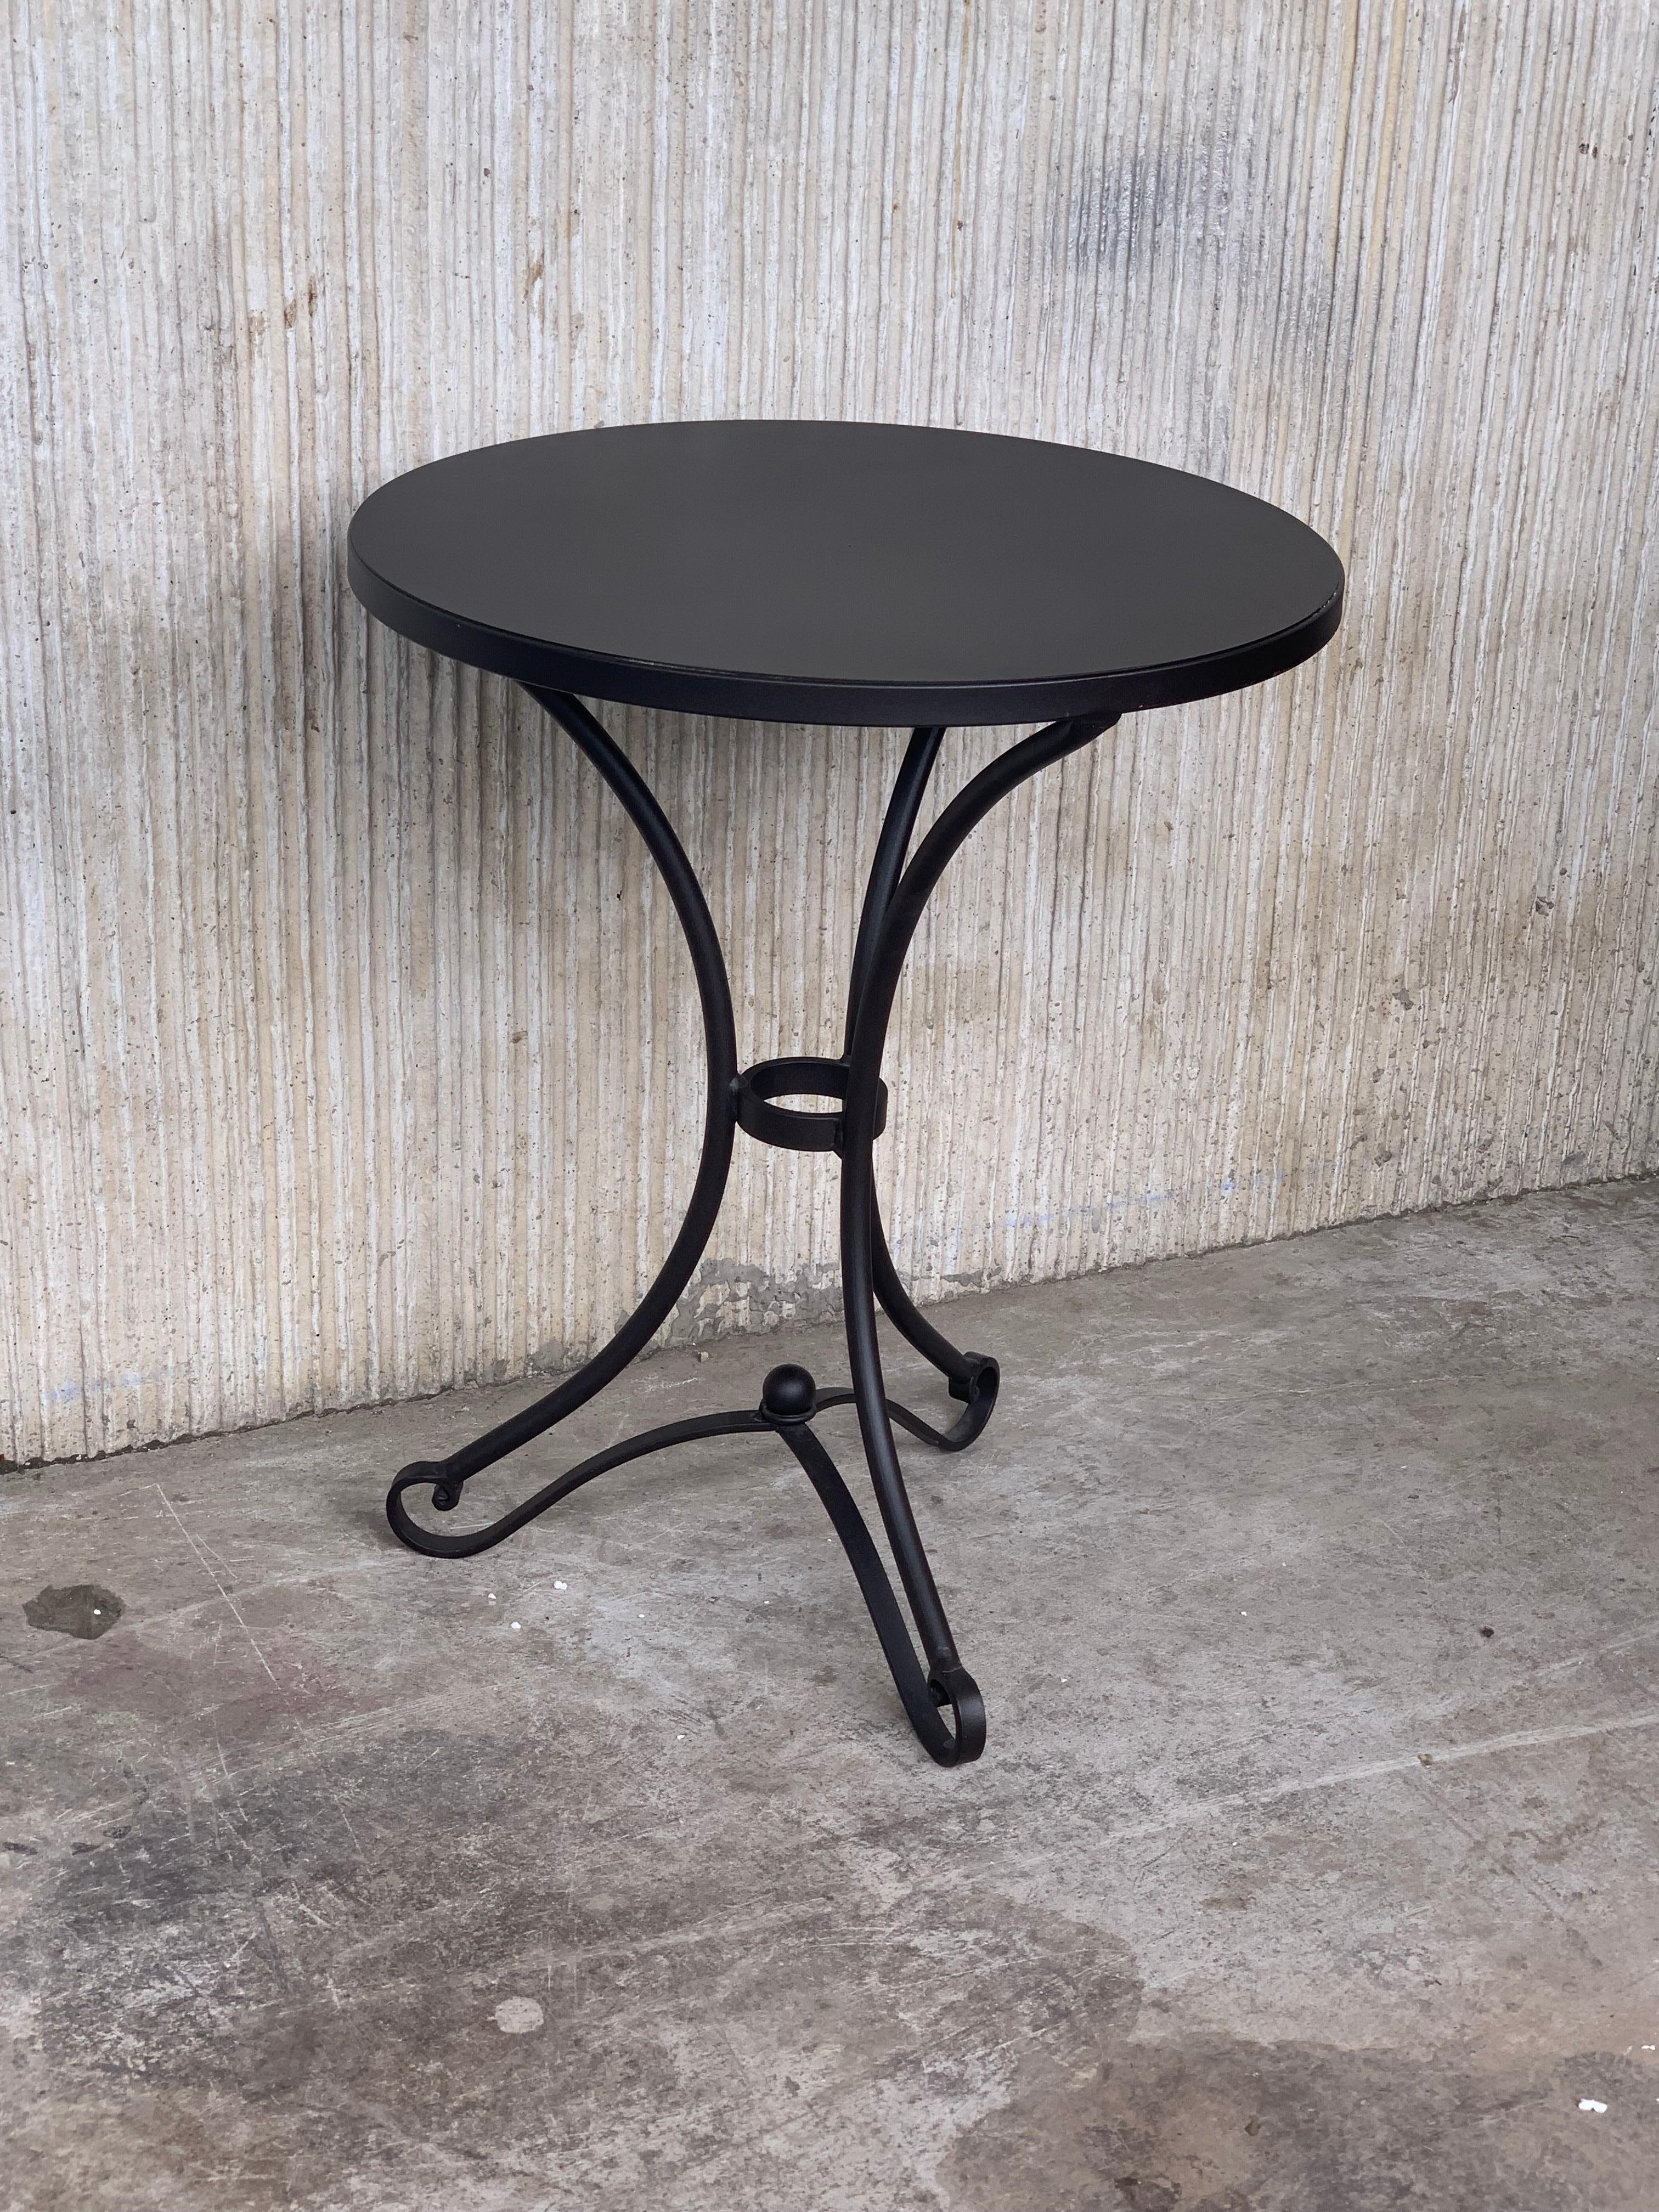 French Provincial 20th Century Round Cast Iron Base with Iron Top Garden Table or Bistro Table